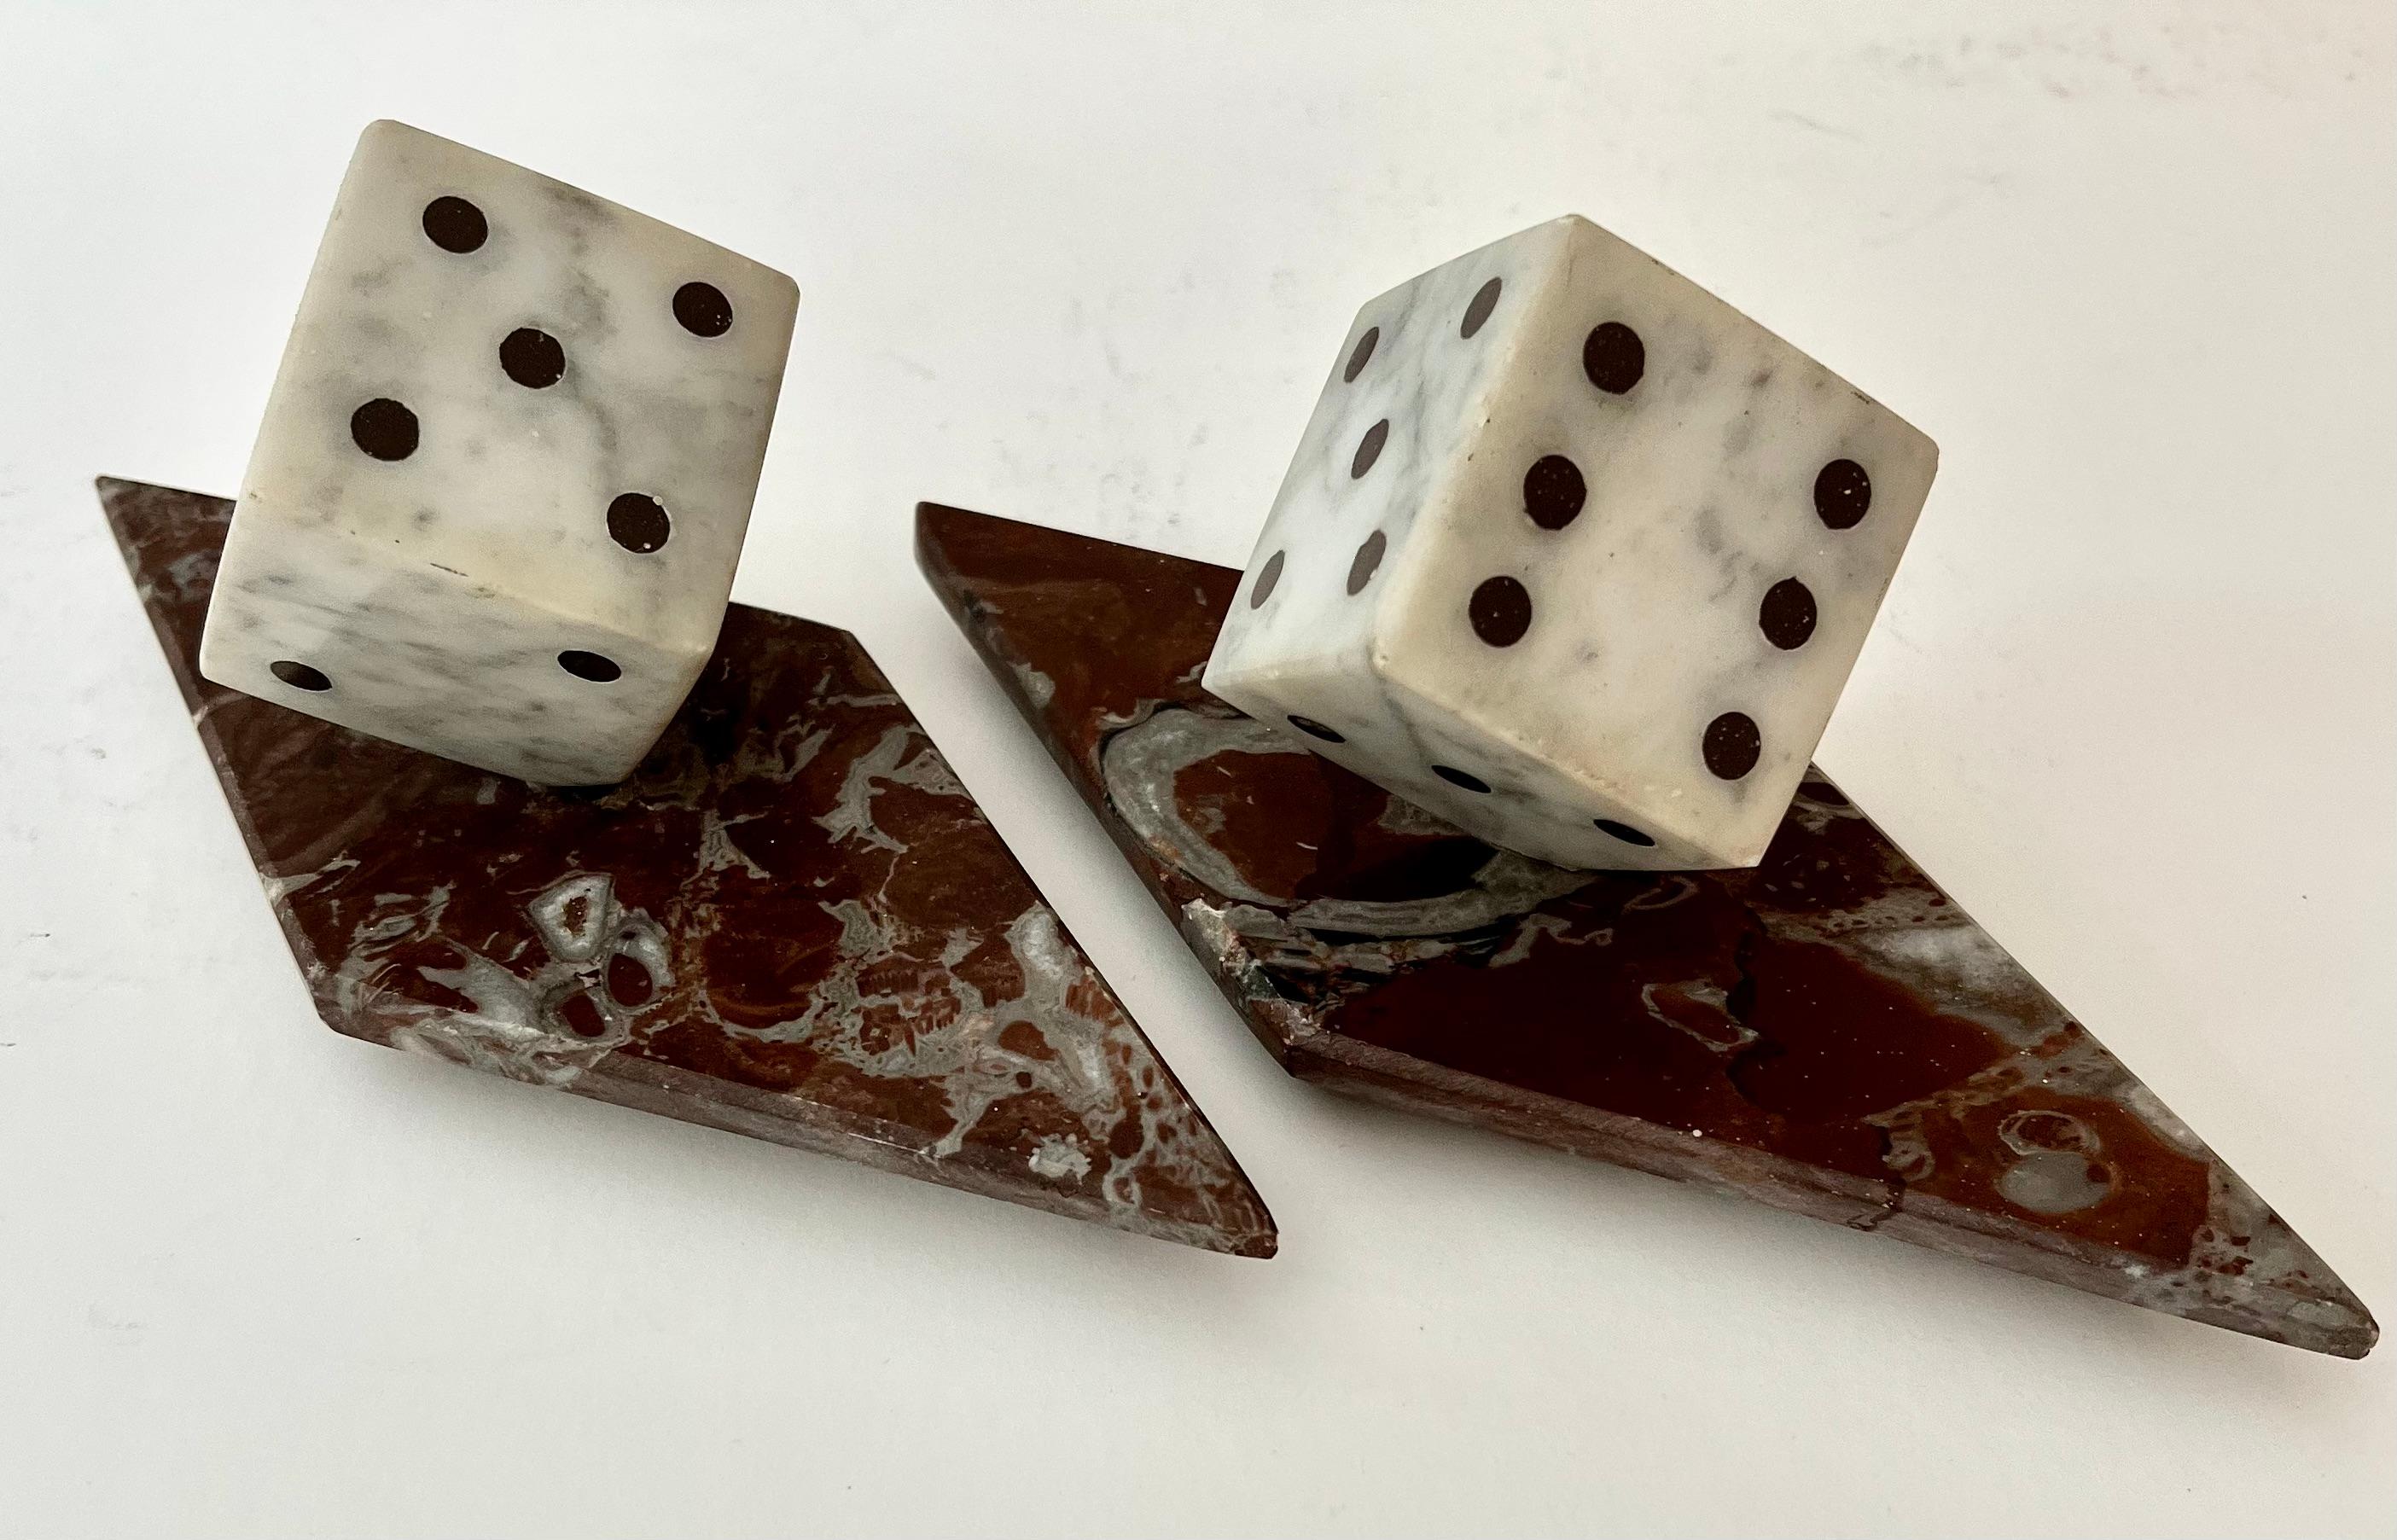 Pair of Marble Dice on Marble bases. The pair are a nice compliment to any shelf and great for the game aficionado or child's room. The roll of the dice and good luck!